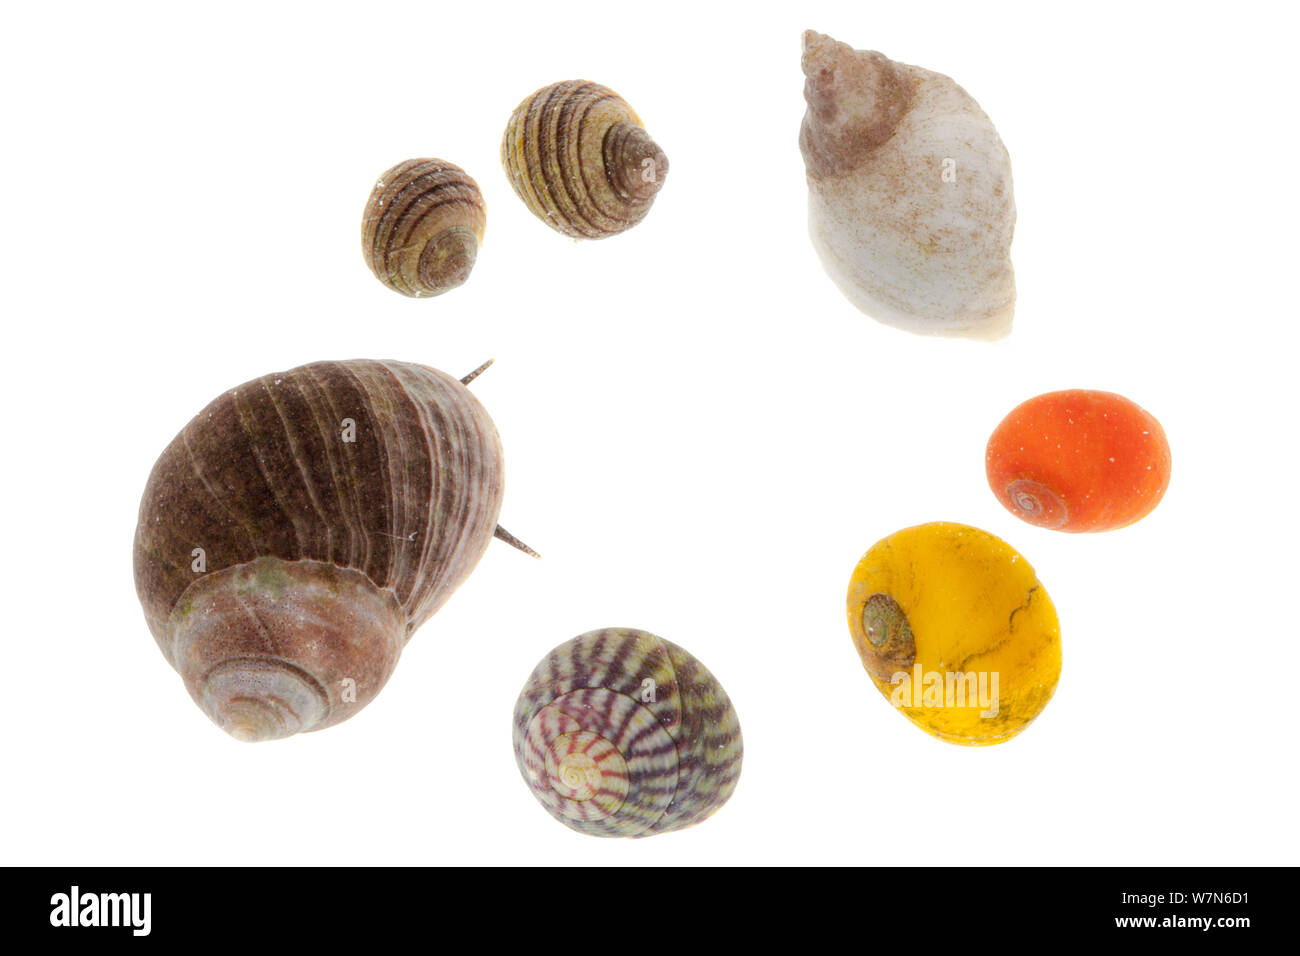 Selection of gastropods commonly found in rockpools, clockwise from top left: Periwinkle (Littorina compressa / nigrolineata), Dogwhelk (Nucella lapillus / Thaius lapillus), Common Flat Periwinkle (Littorina obtusata), Purple Topshell (Gibbula umbilicalis), Edible Periwinkle (Littorina littorea) against white background. From the Isle of Skye, Inner Hebrides, Scotland, UK. Stock Photo